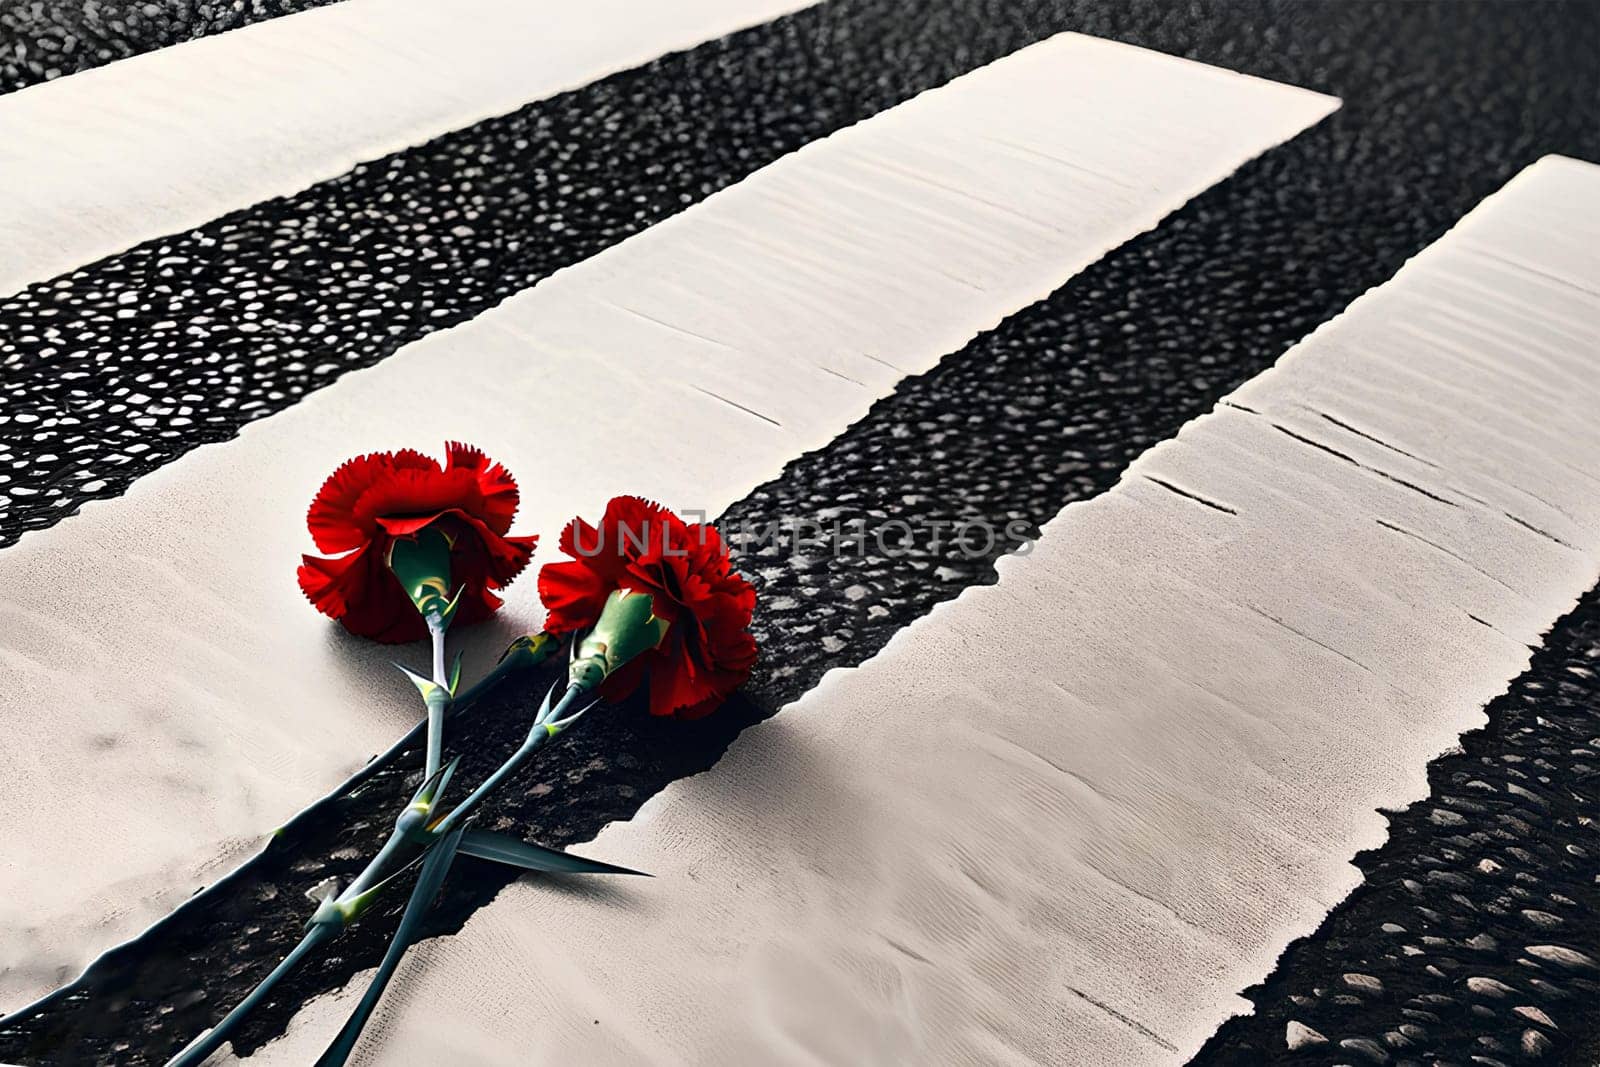 two red carnations on a pedestrian crossing as a symbol of grief for a downed person.